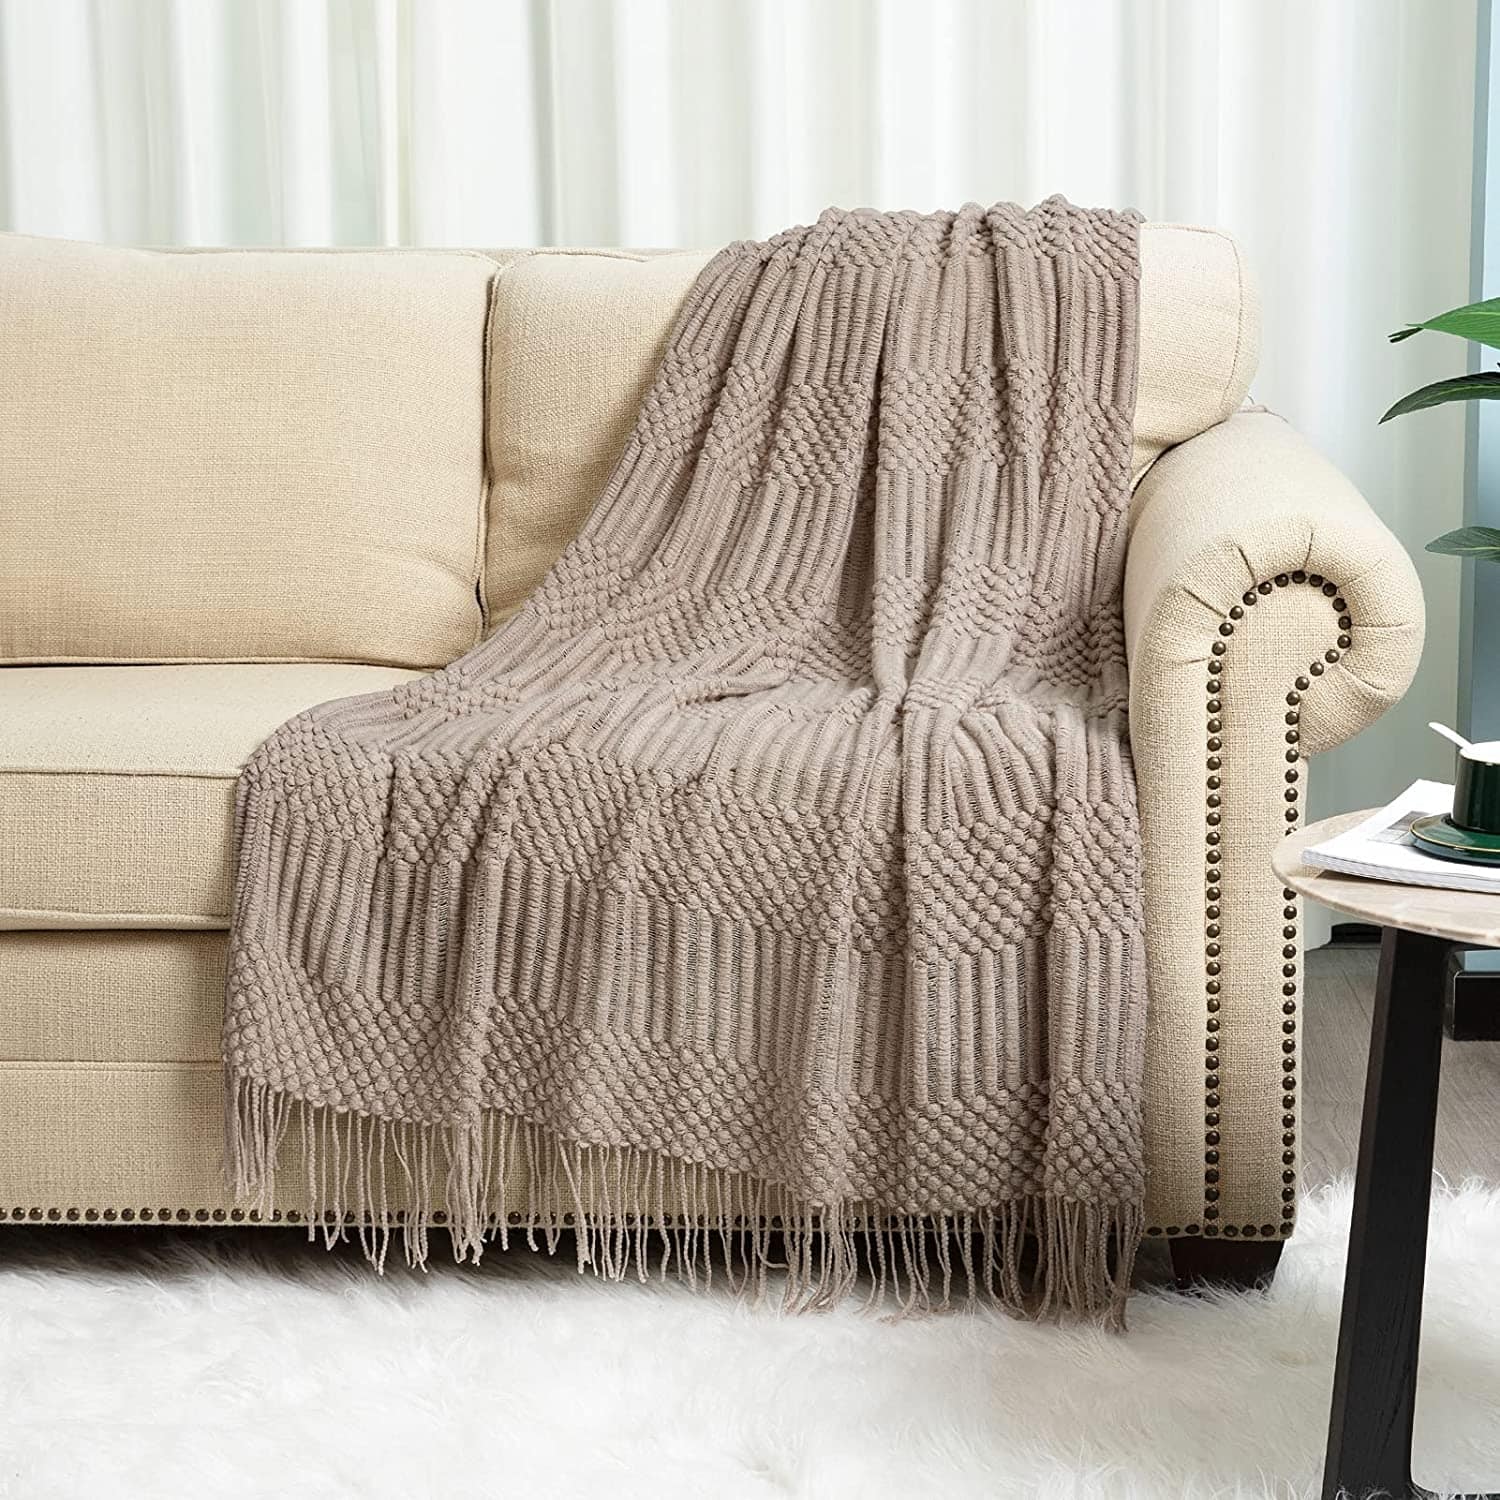 Decorative Throw Knitted Blanket for Women Men and Kids - Bed Bath ...